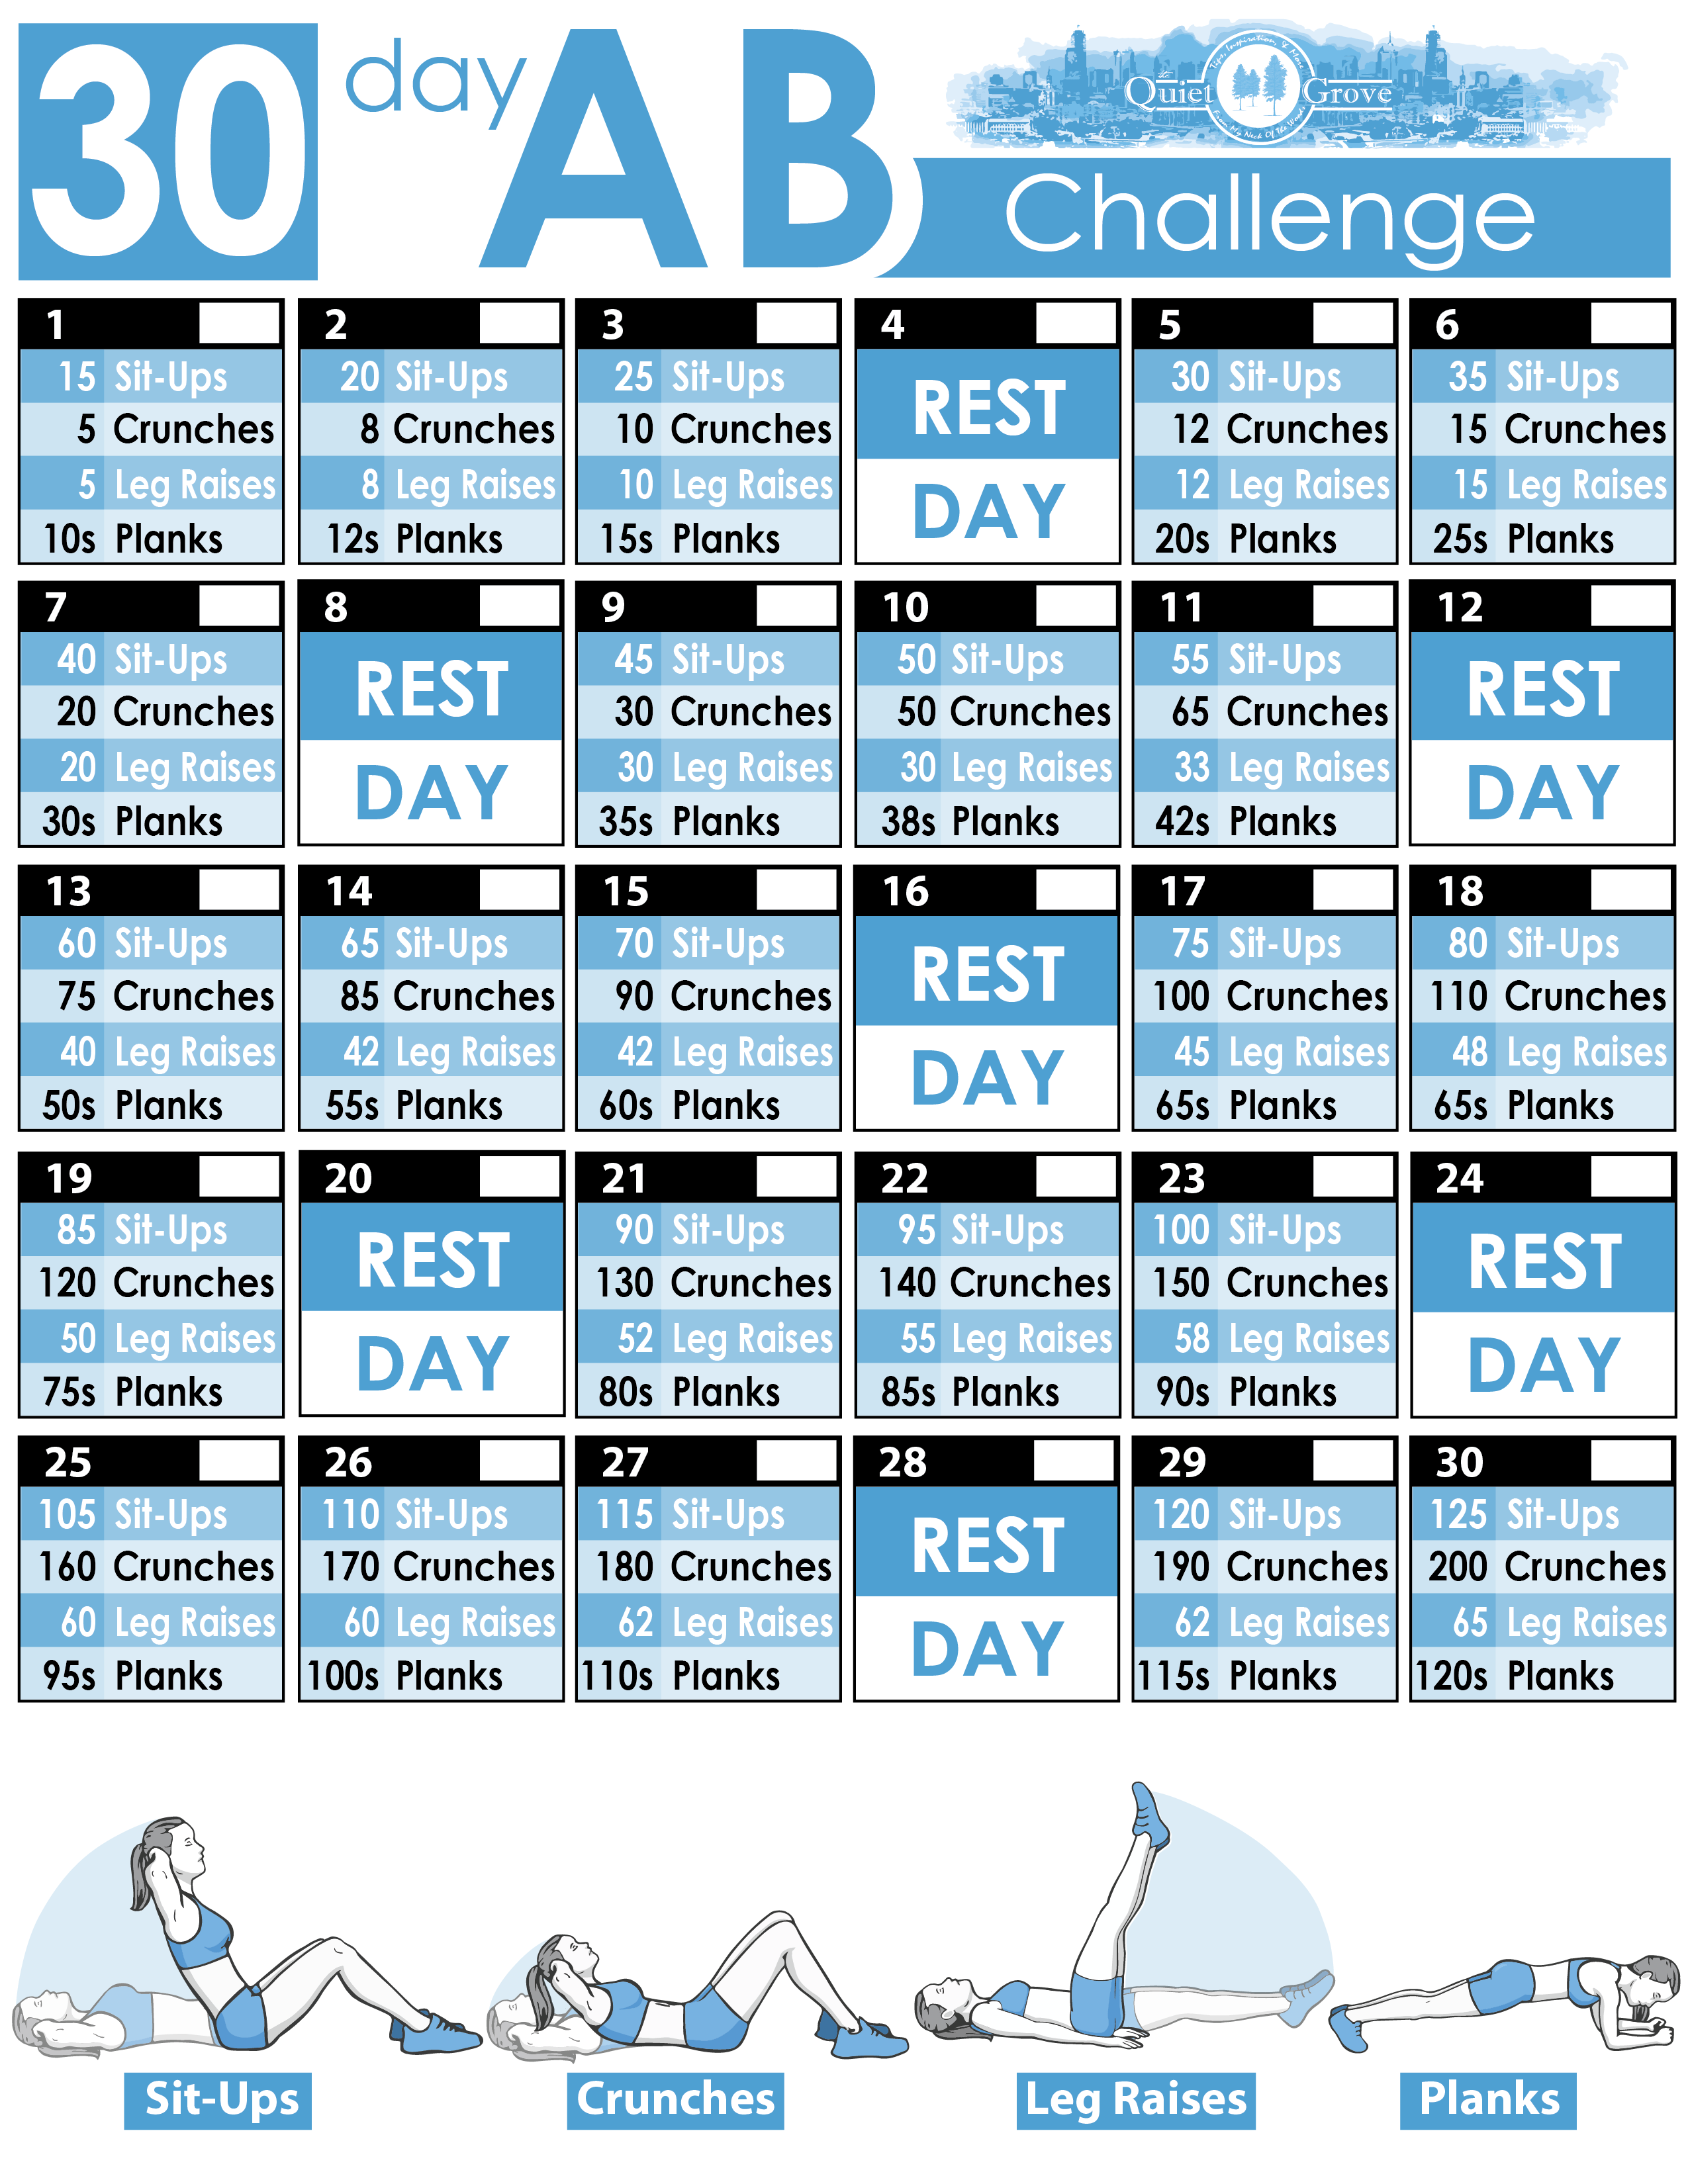 30Day AB Challenge (With Free Printable) ⋆ The Quiet Grove